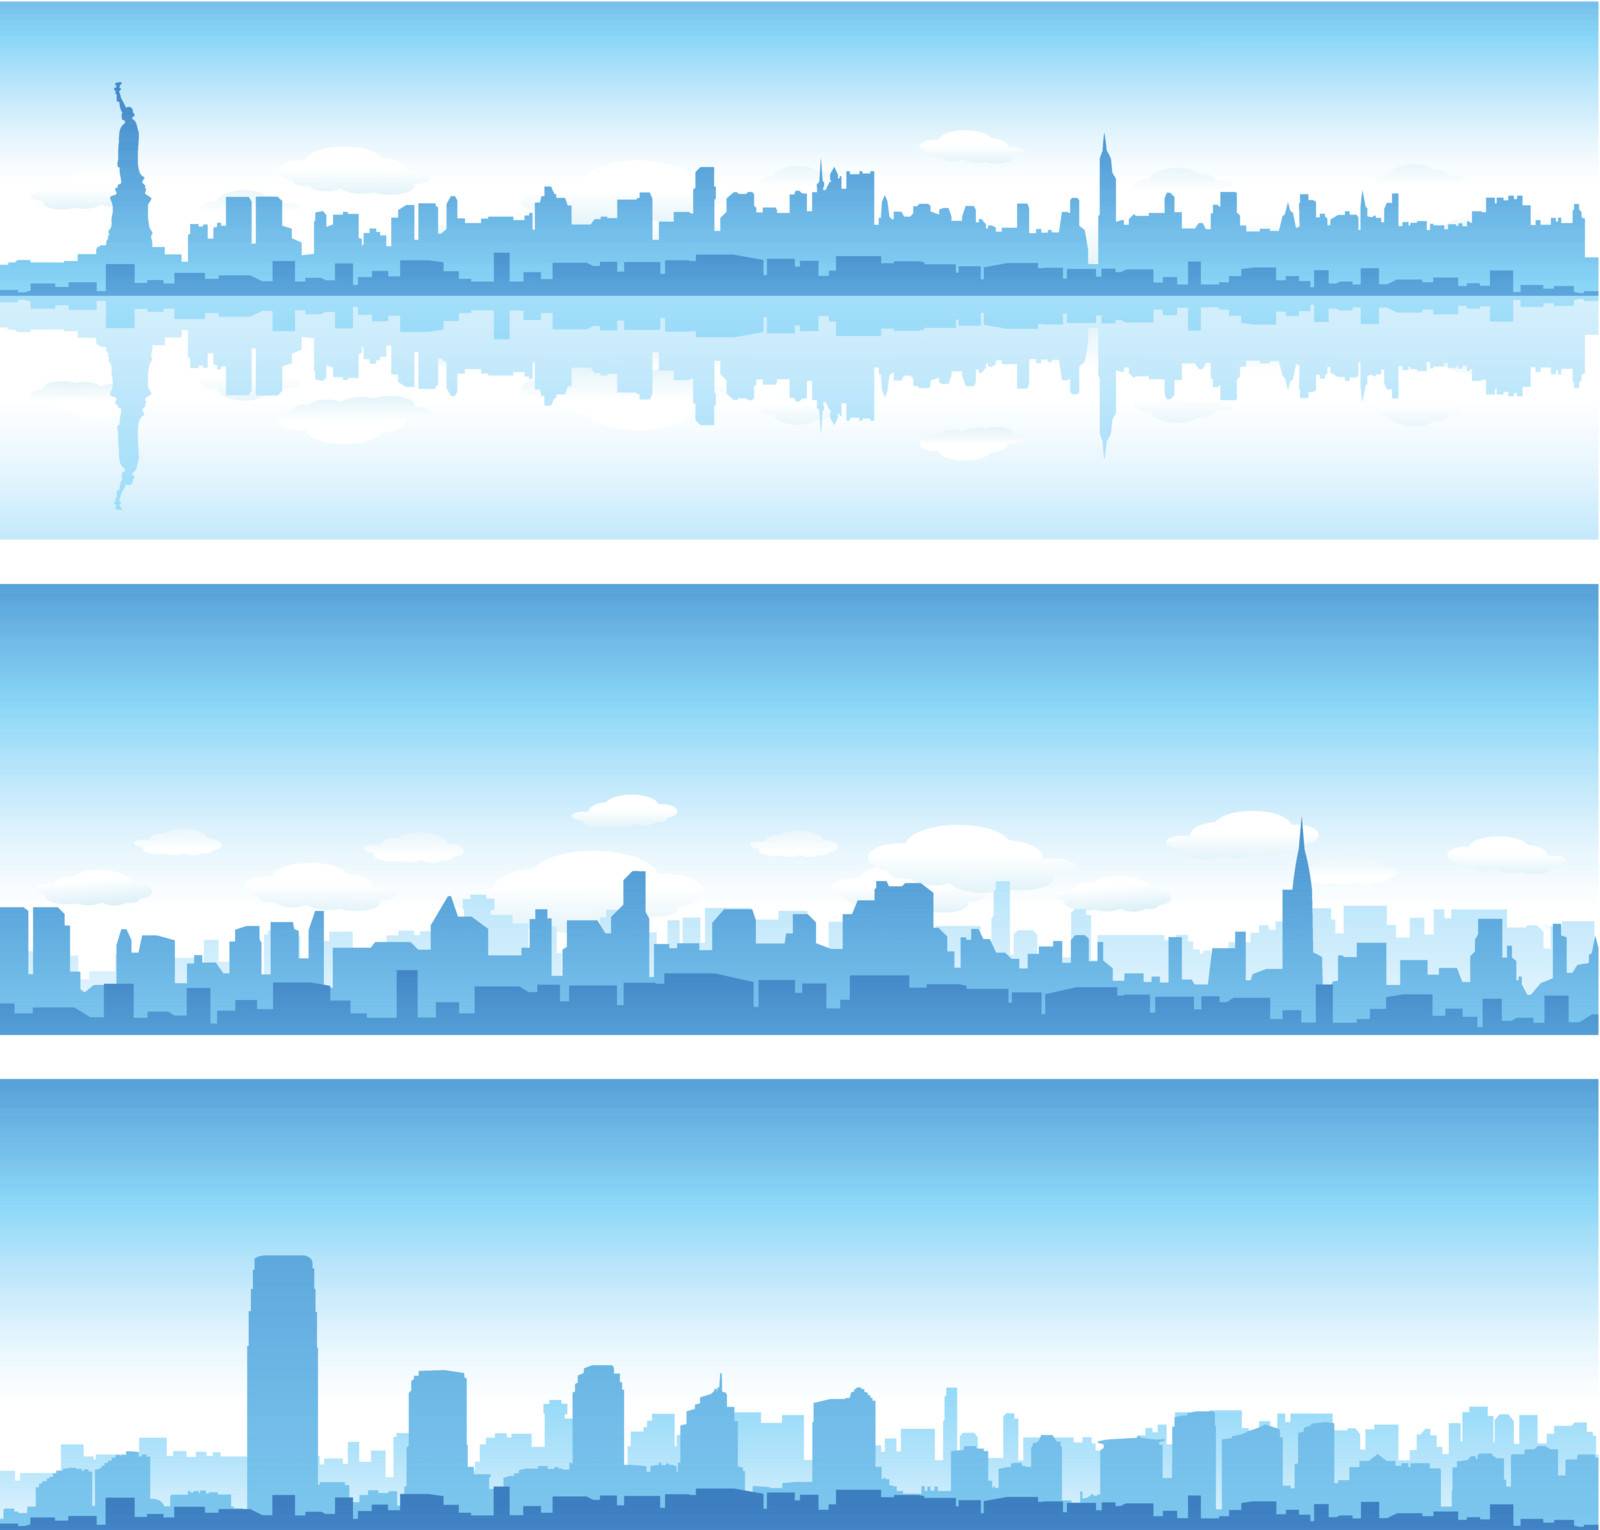 Cityscapes silhouettes background